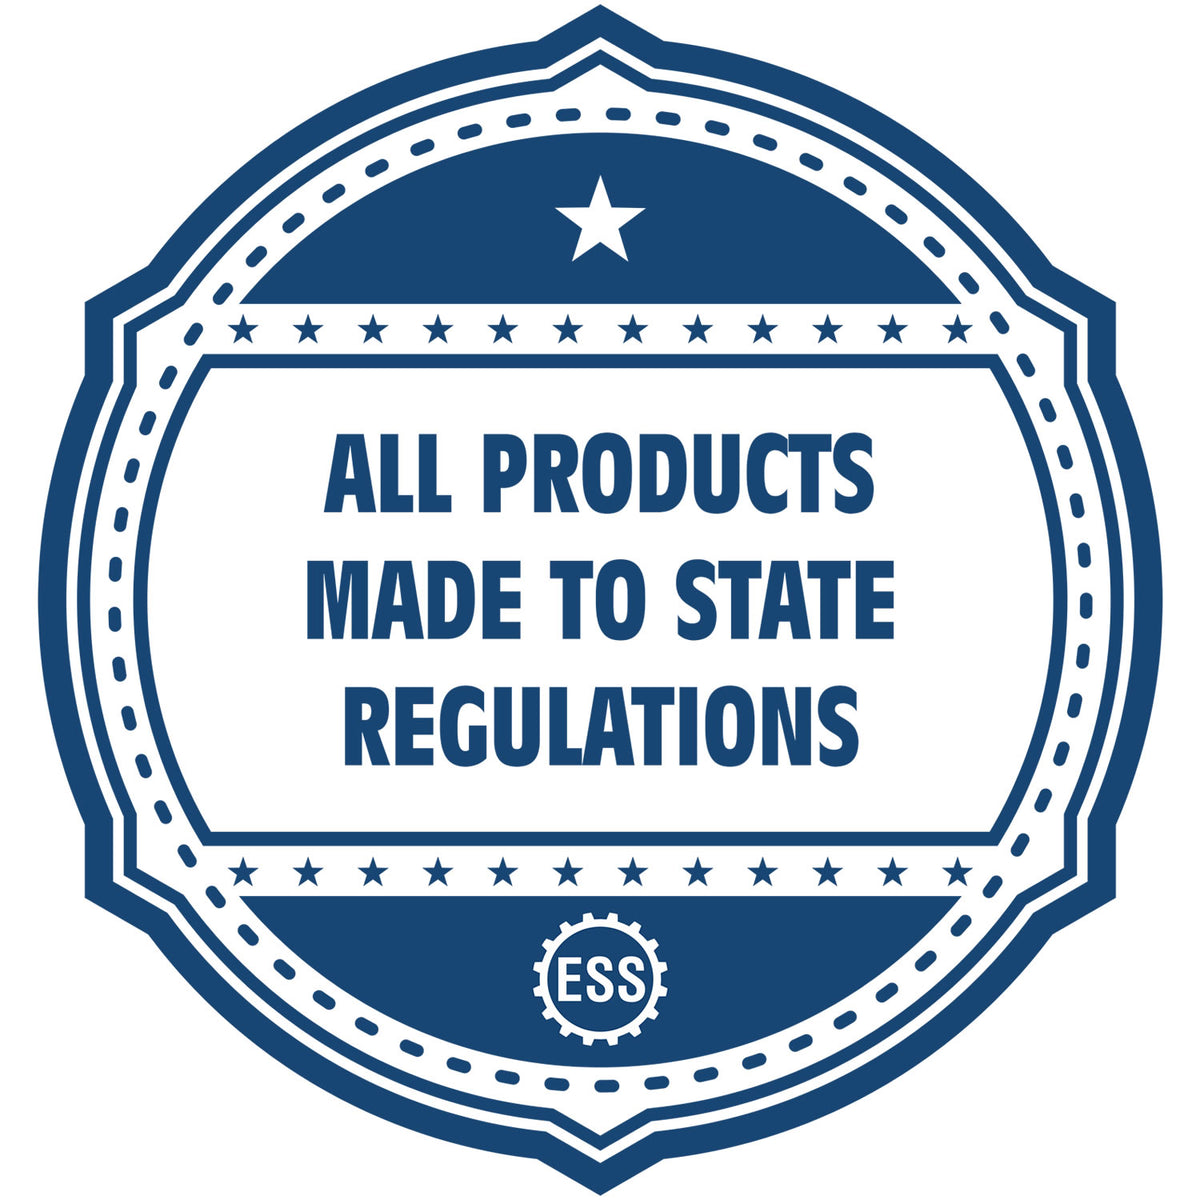 A blue icon or badge for the Heavy Duty Cast Iron Texas Geologist Seal Embosser showing that this product is made in compliance with state regulations.